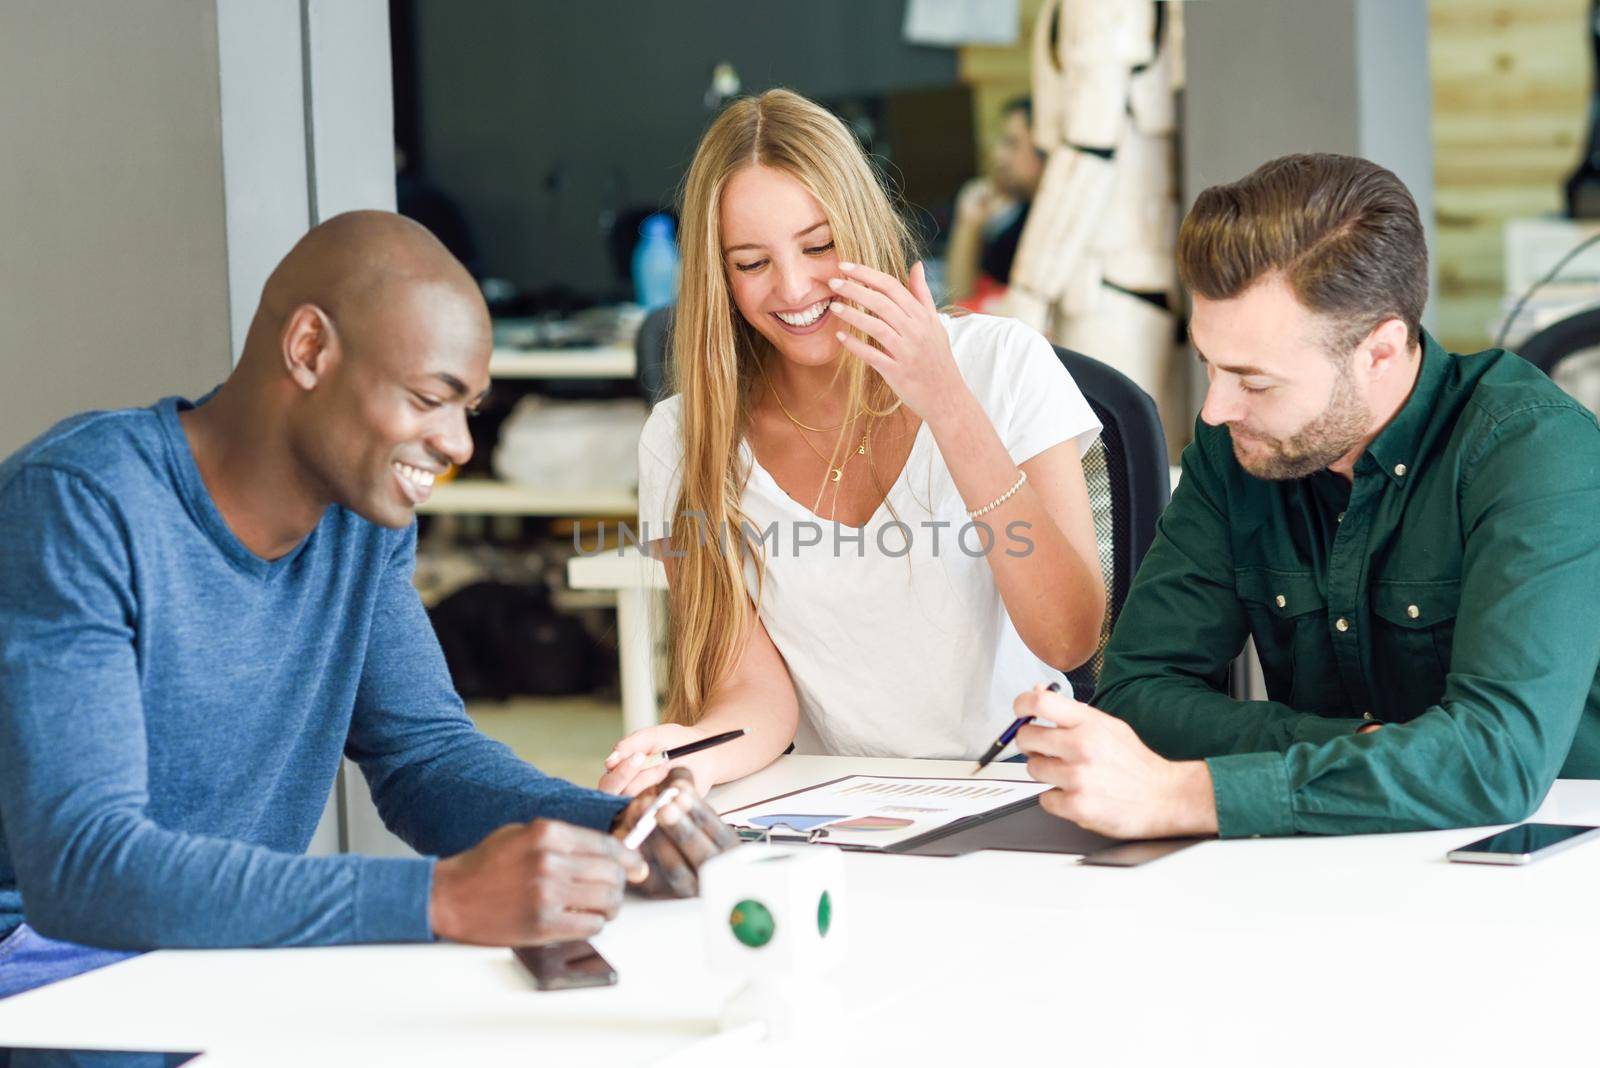 Multi-ethnic group of three young people studying and smiling together by javiindy